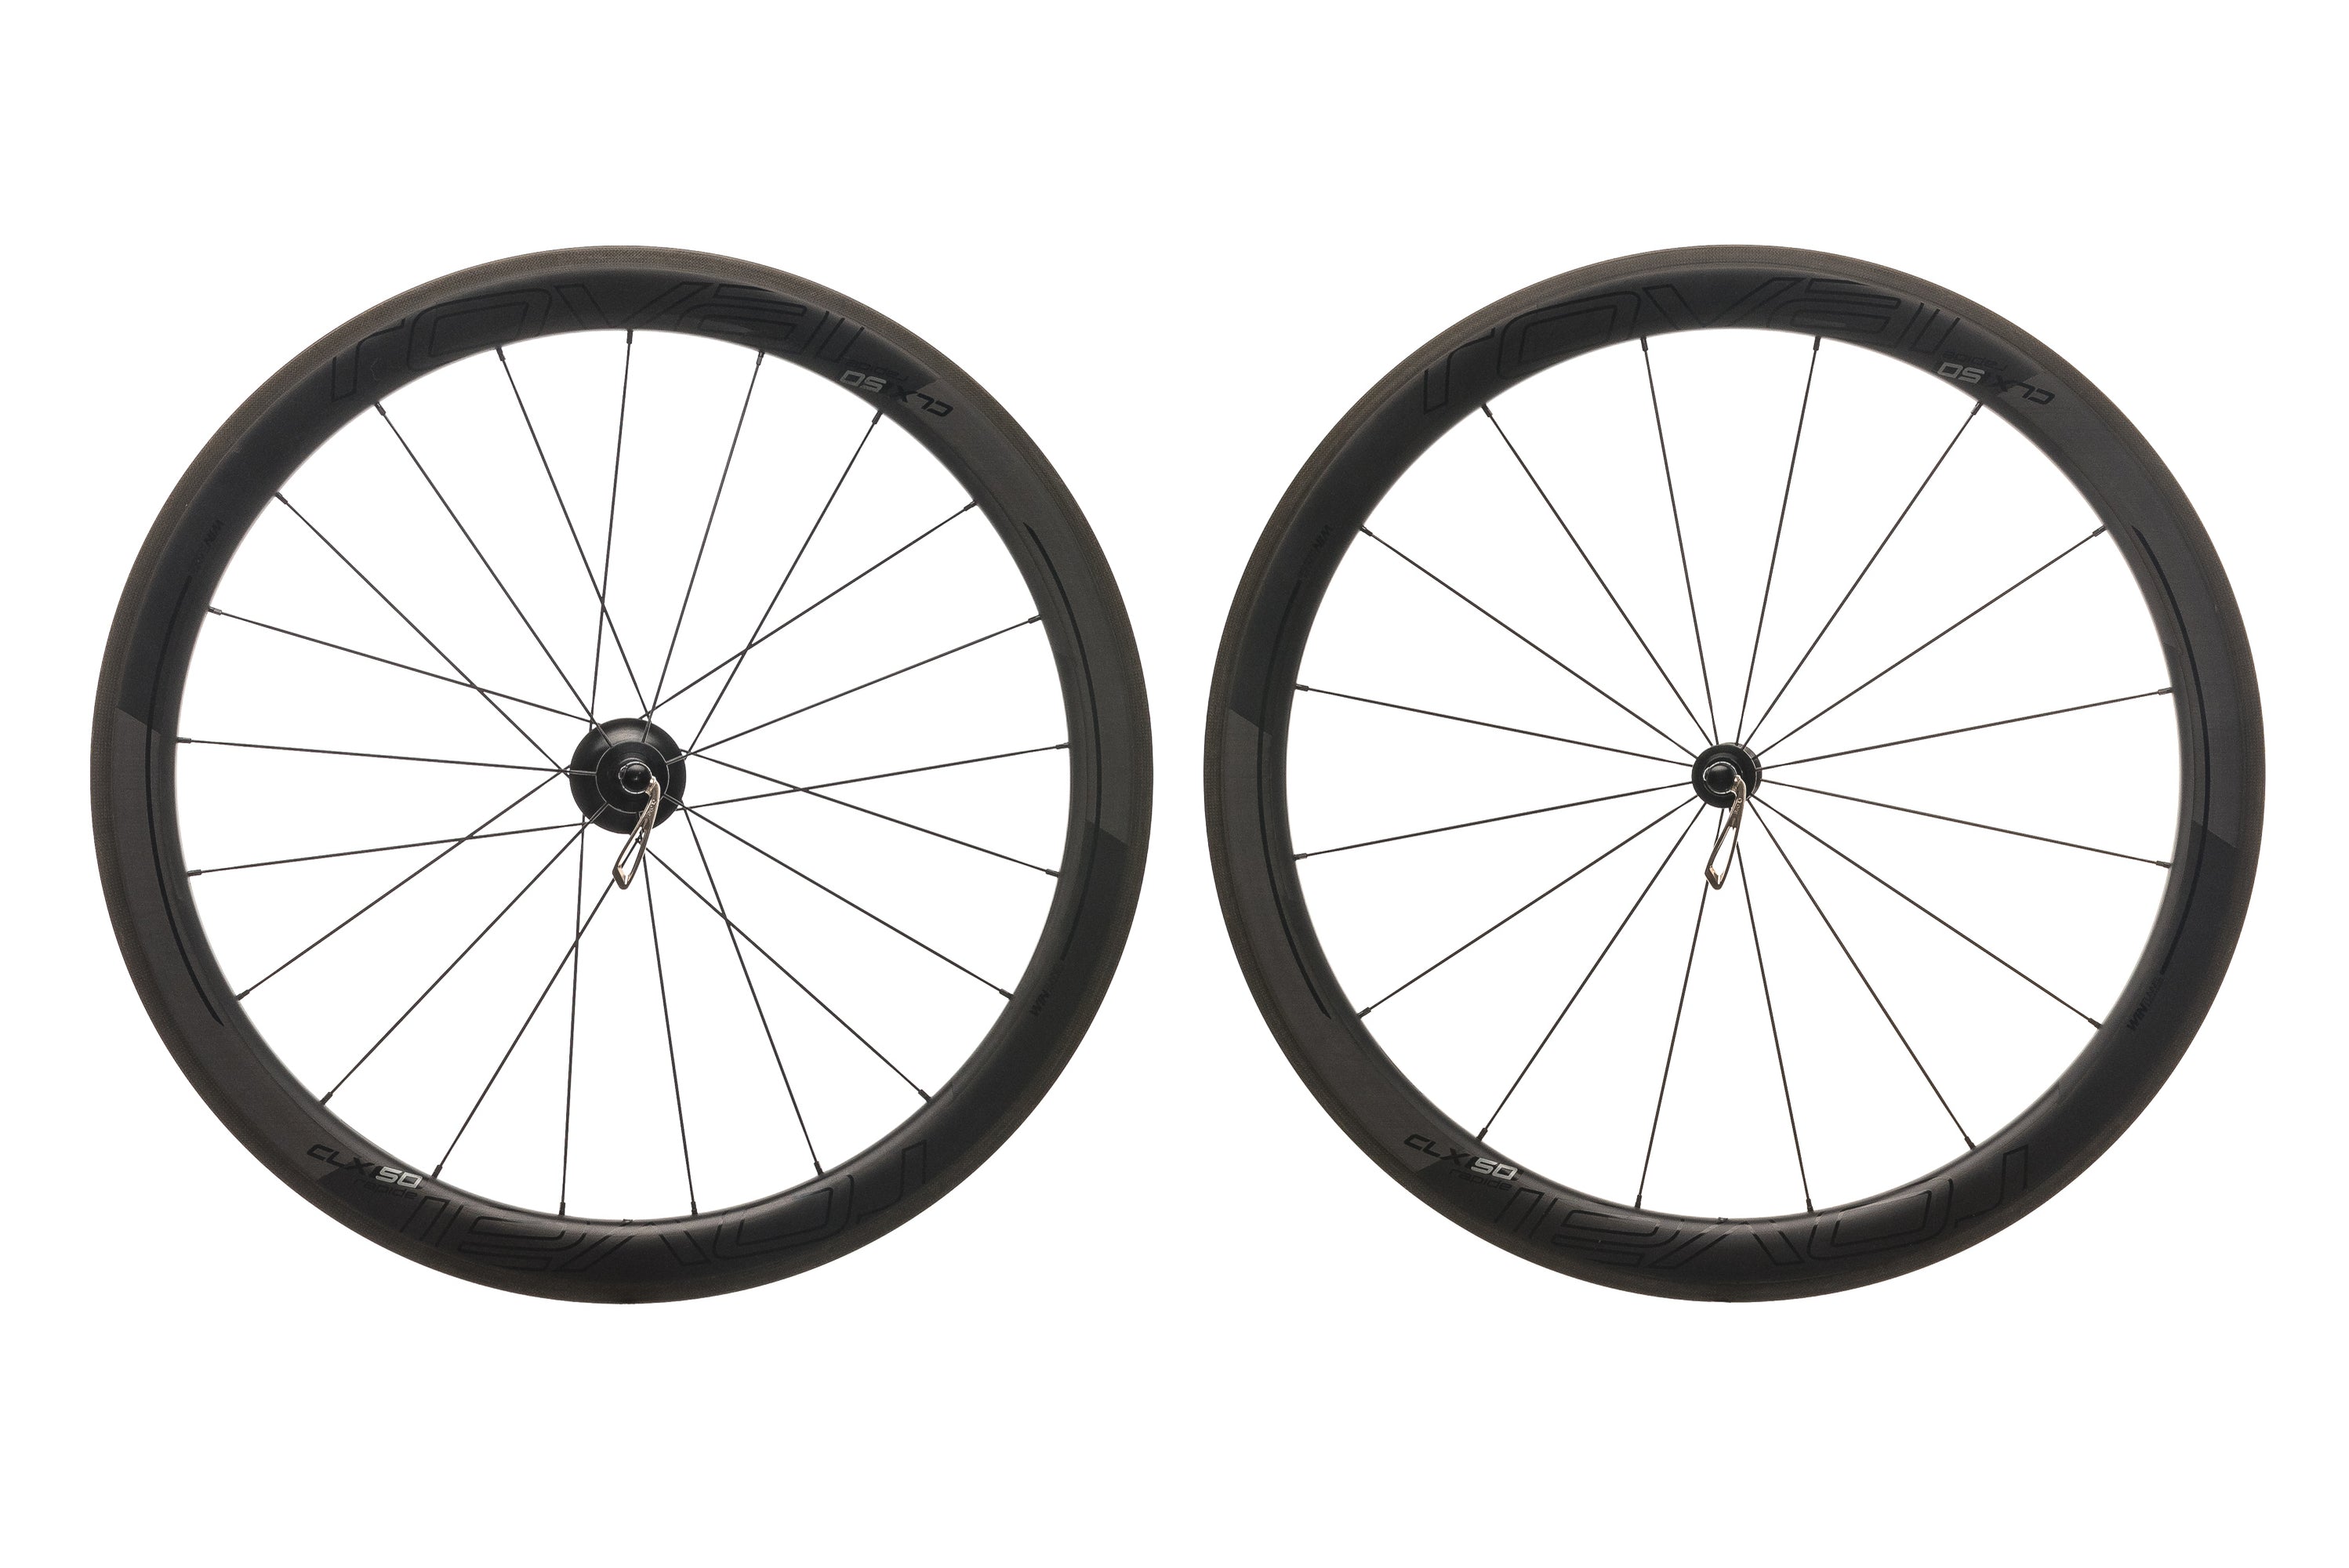 Roval CLX 50 Rapide Carbon Tubeless 700c Wheelset non-drive side